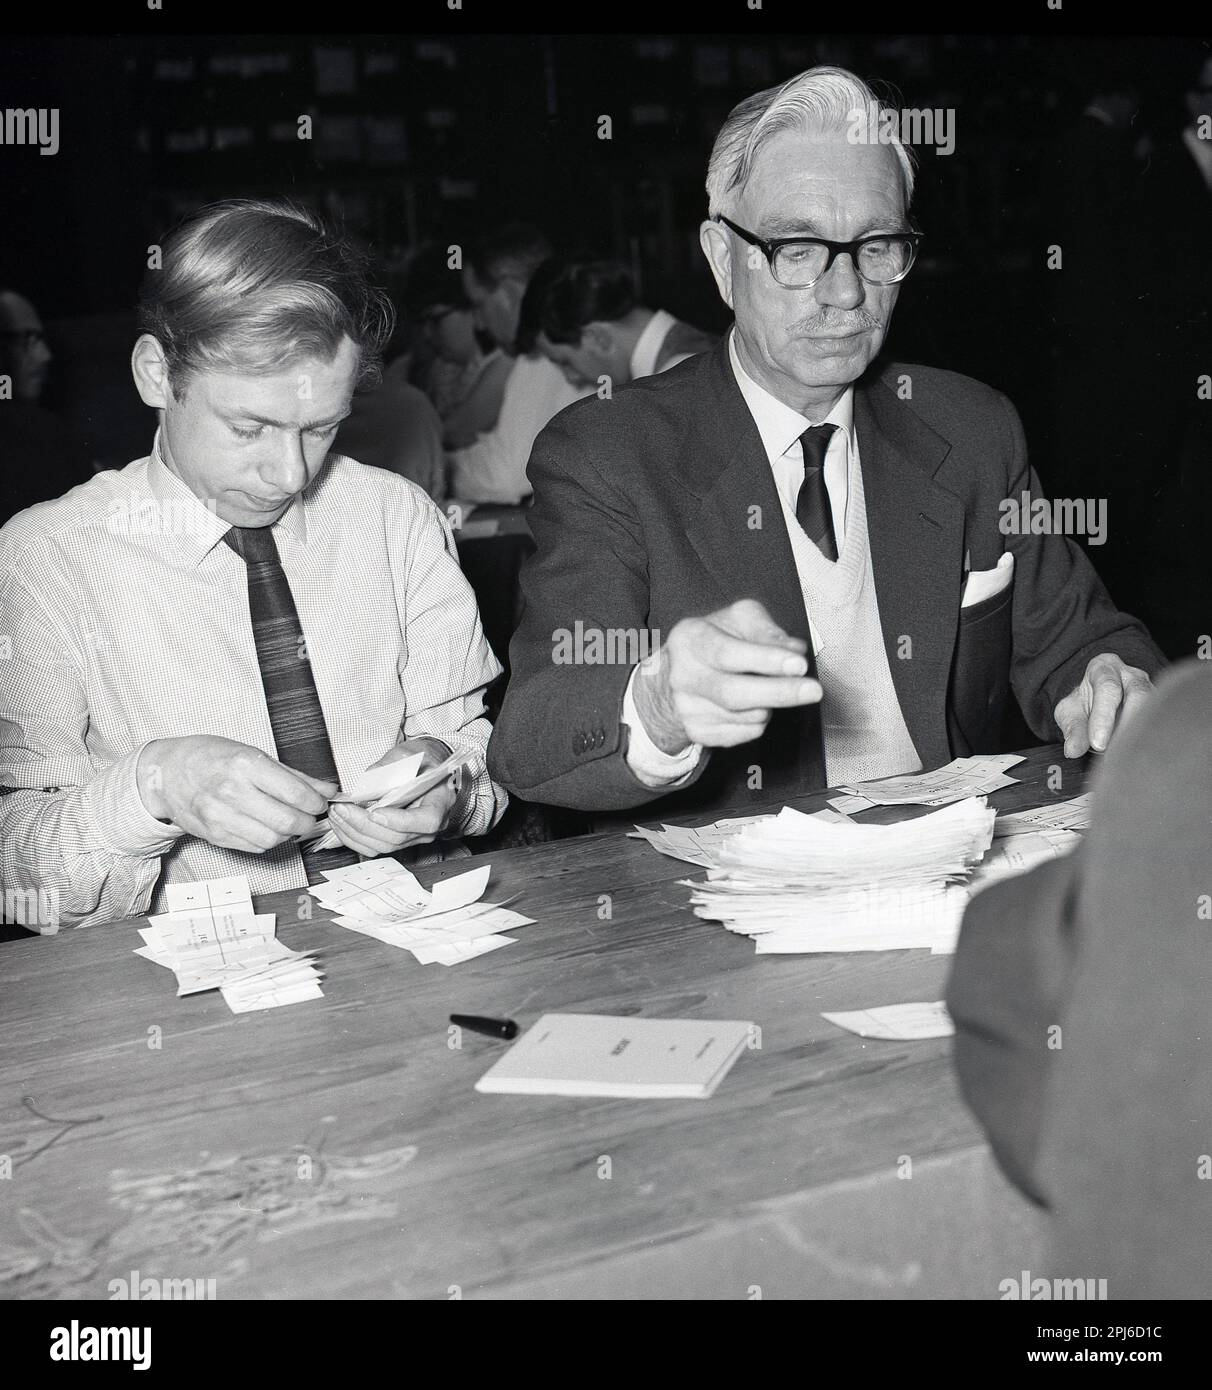 1960s, historical, two males, one elder, the other younger, sitting counting votes by hand at the St Pancras North constituency at the 1964 General election, London, England, UK. St Pancras North was created in 1885 and  elected a Member of Parliament up to 1983, when the area became part of a new constituency, Holborn and St Pancras. Stock Photo